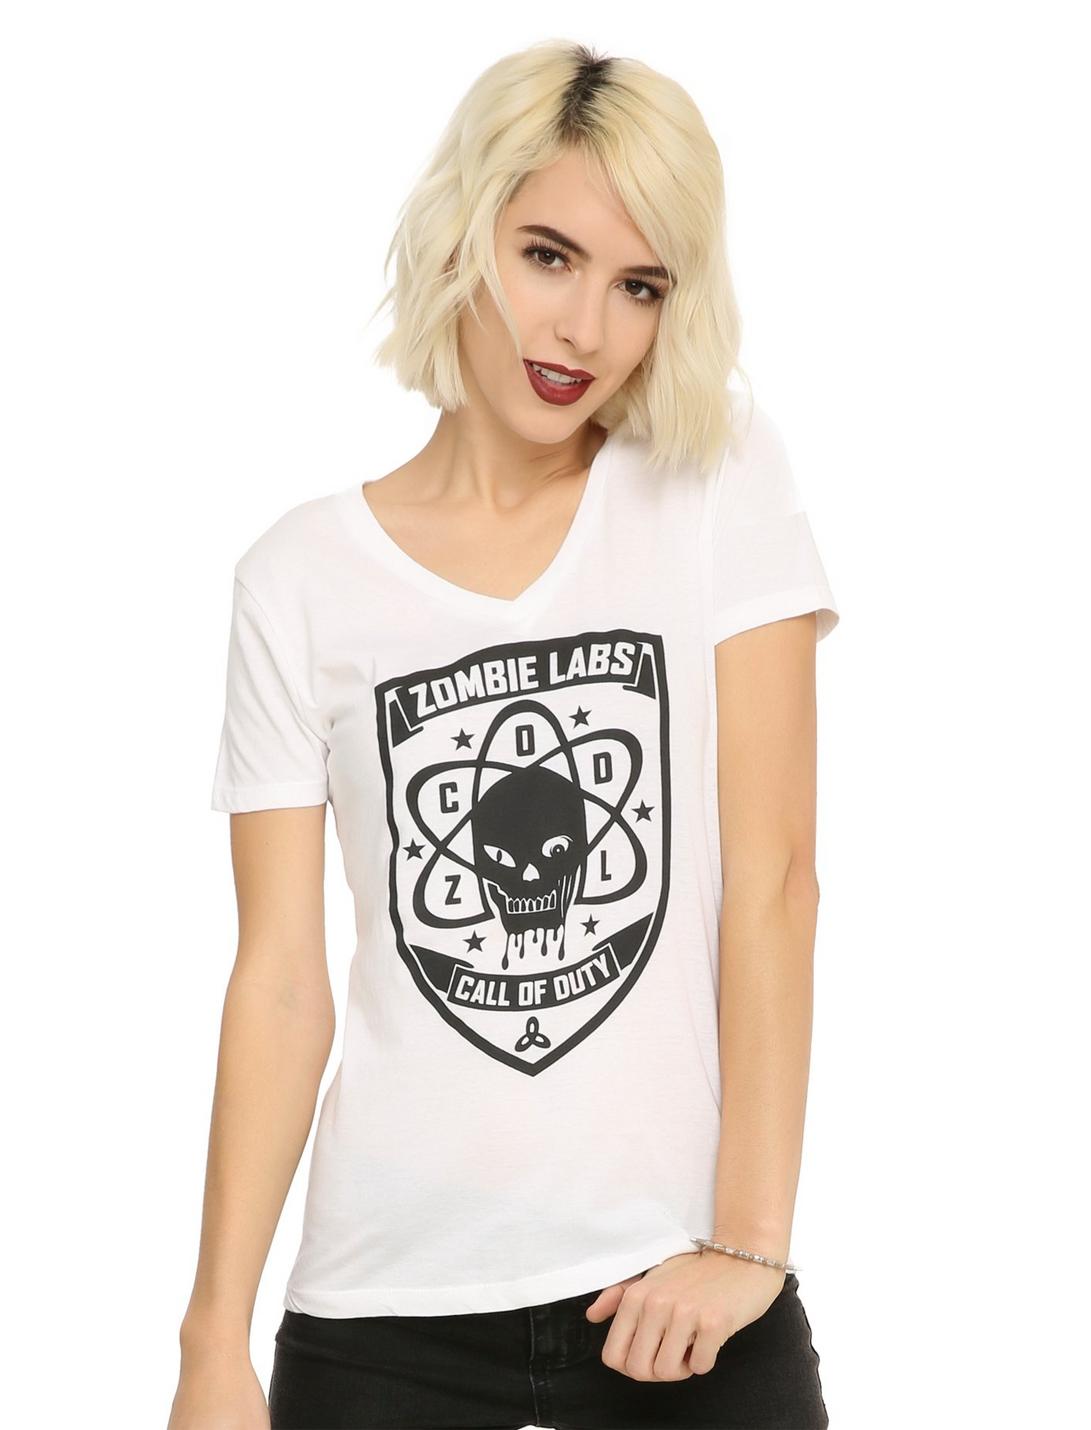 Call Of Duty: Black Ops III Zombie Labs Girls T-Shirt, , hi-res